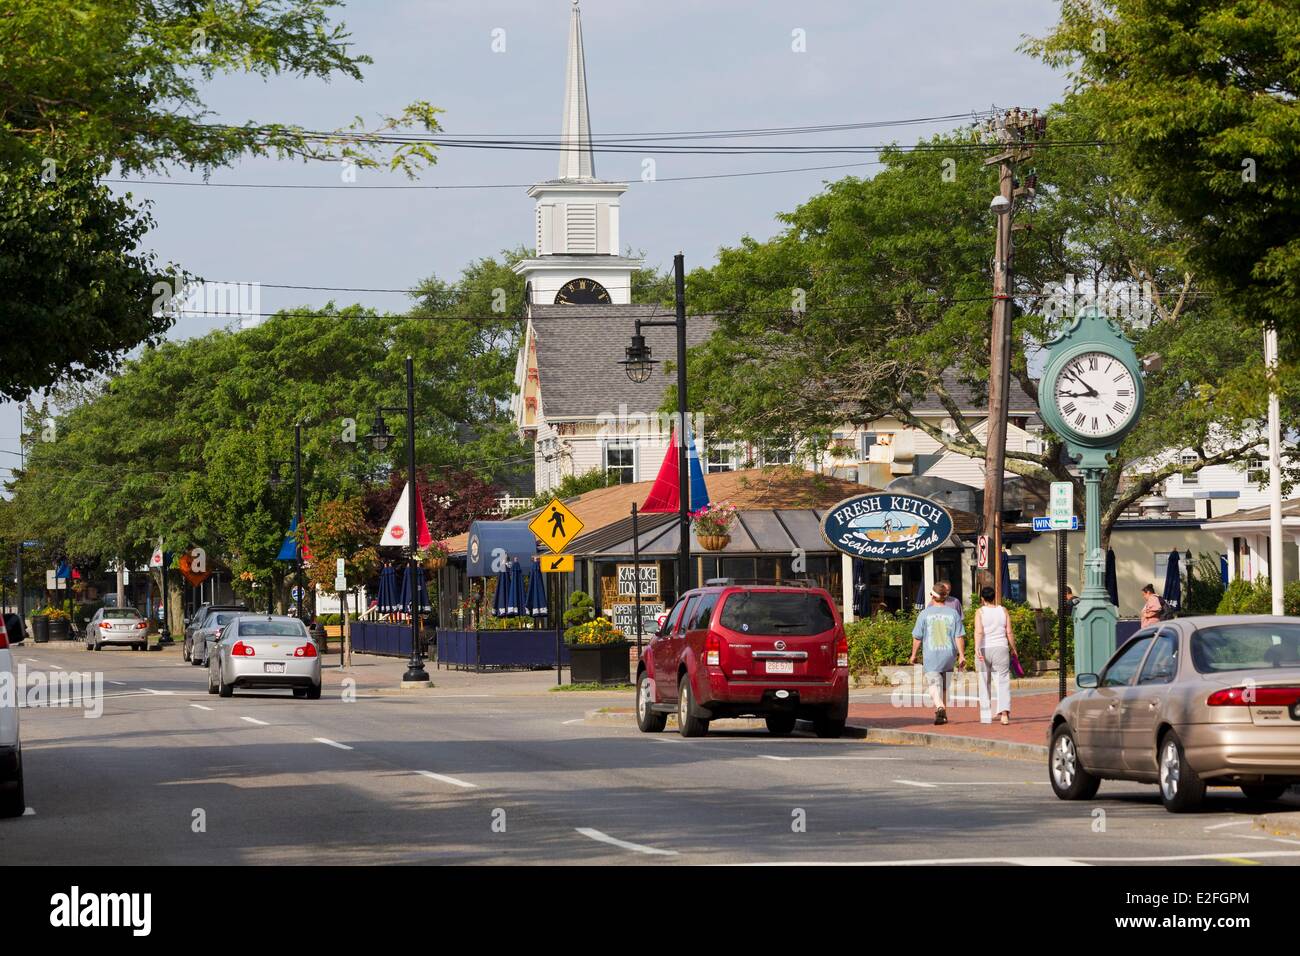 United States, Massachusetts, Cape Cod, Hyannis, Hyannisport, Main Street and its shops, boutiques and restaurants Stock Photo